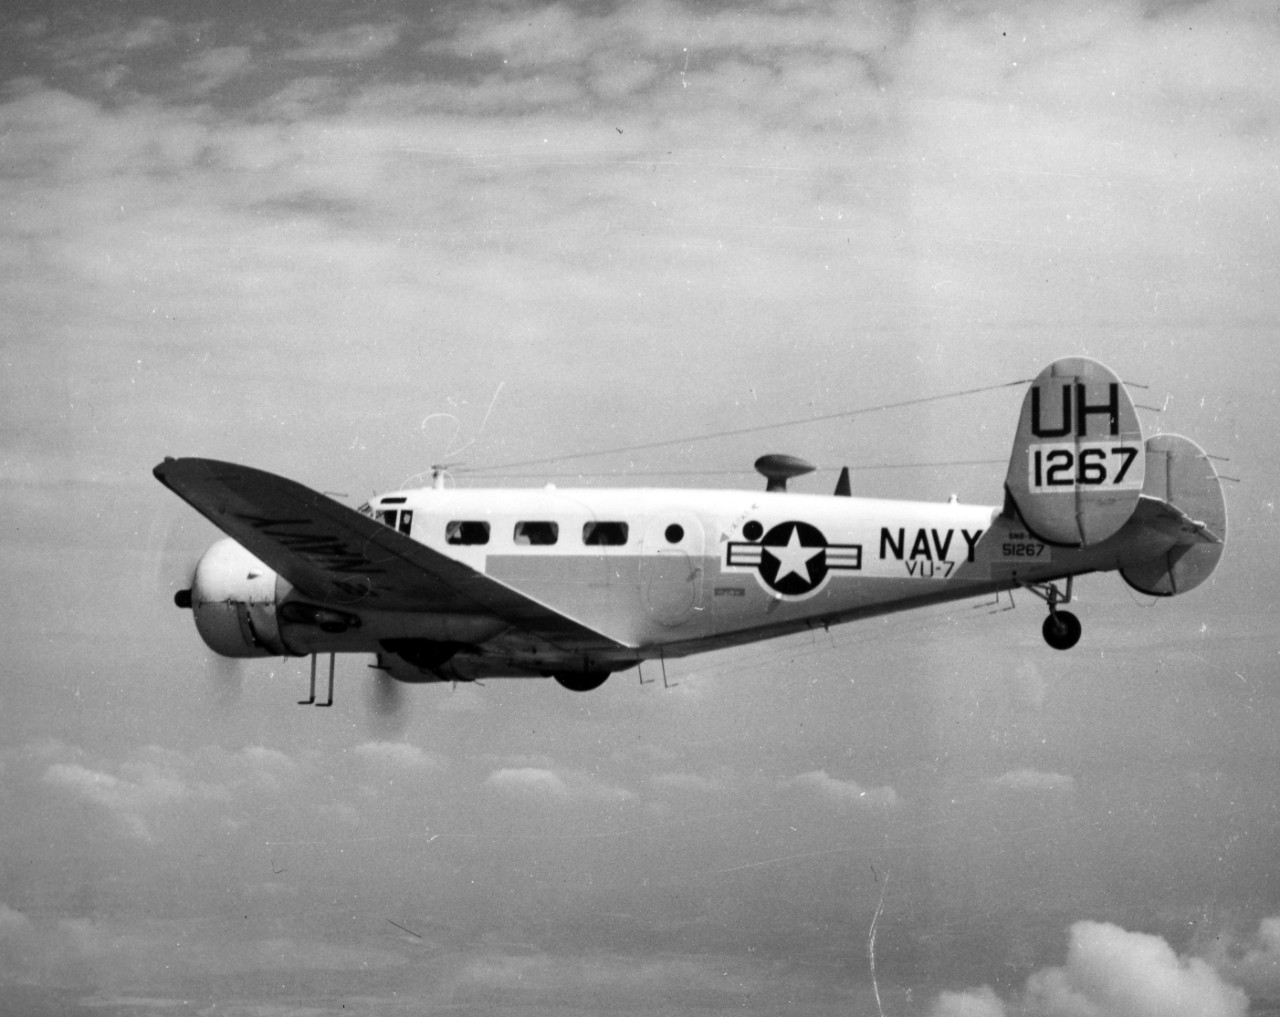 View of SNB-5P in flight, showing underside of aircraft. November 19, 1962. 